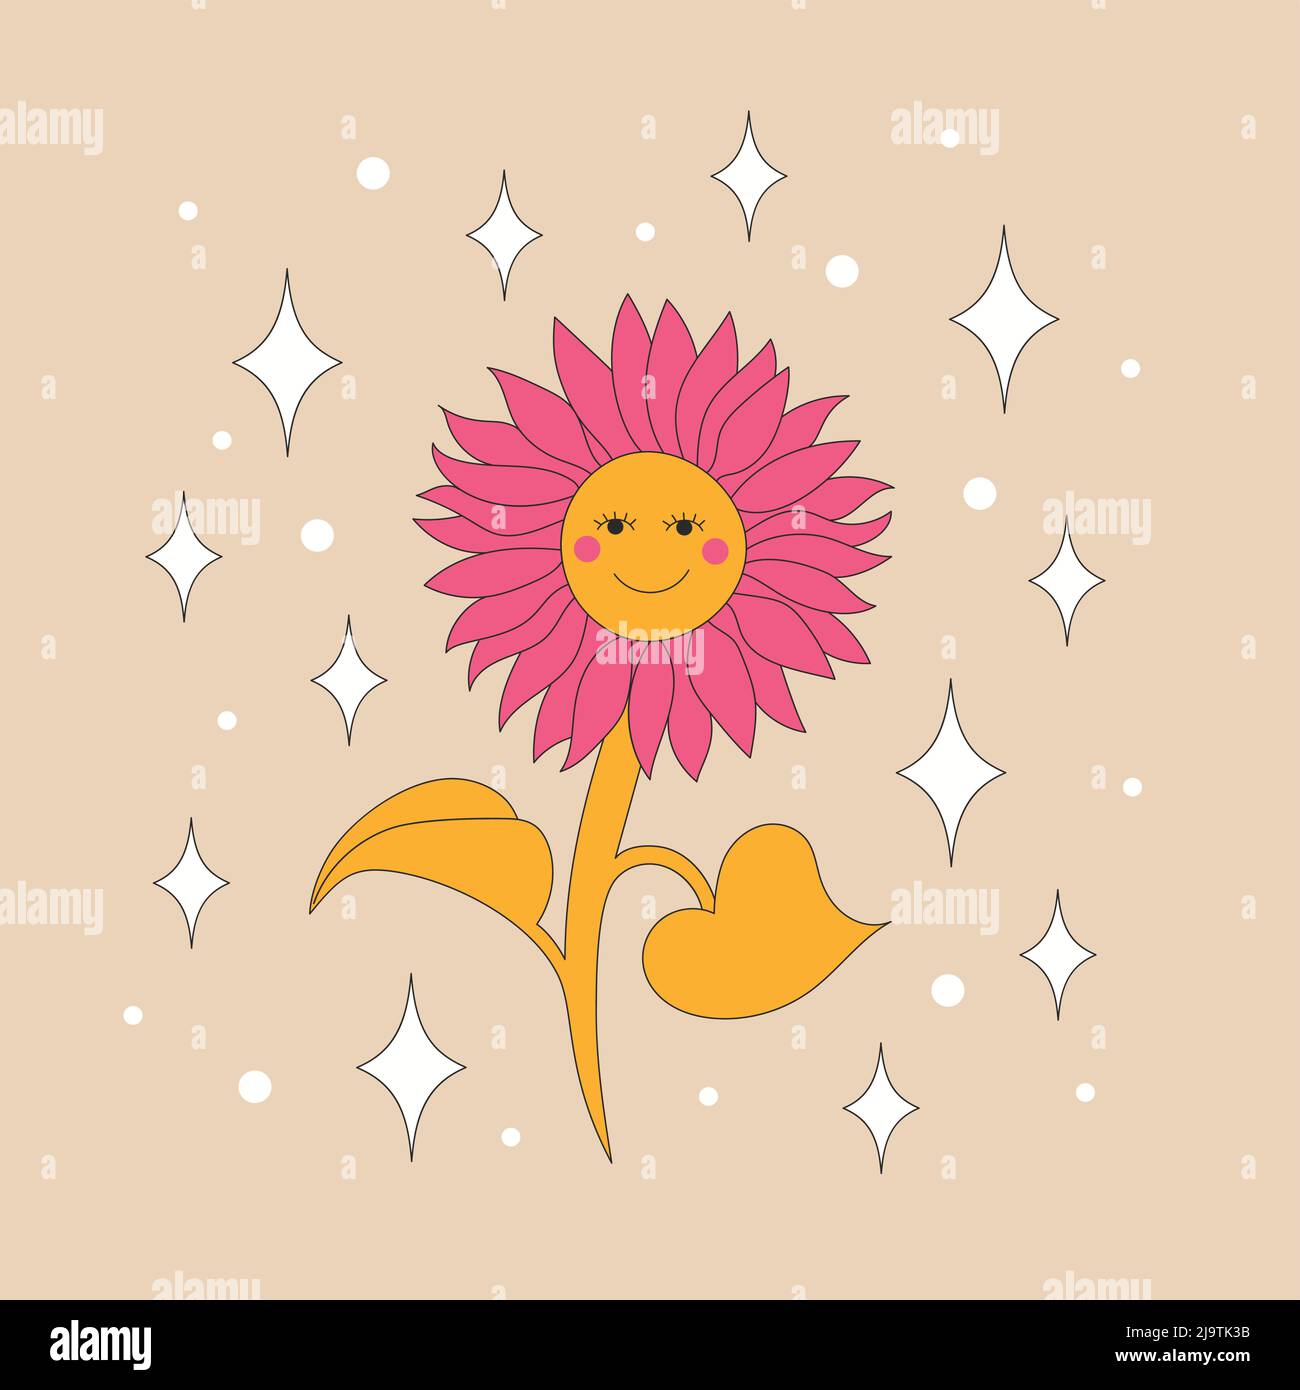 Retro sunflower with sparkles and a smile.  Stock Vector